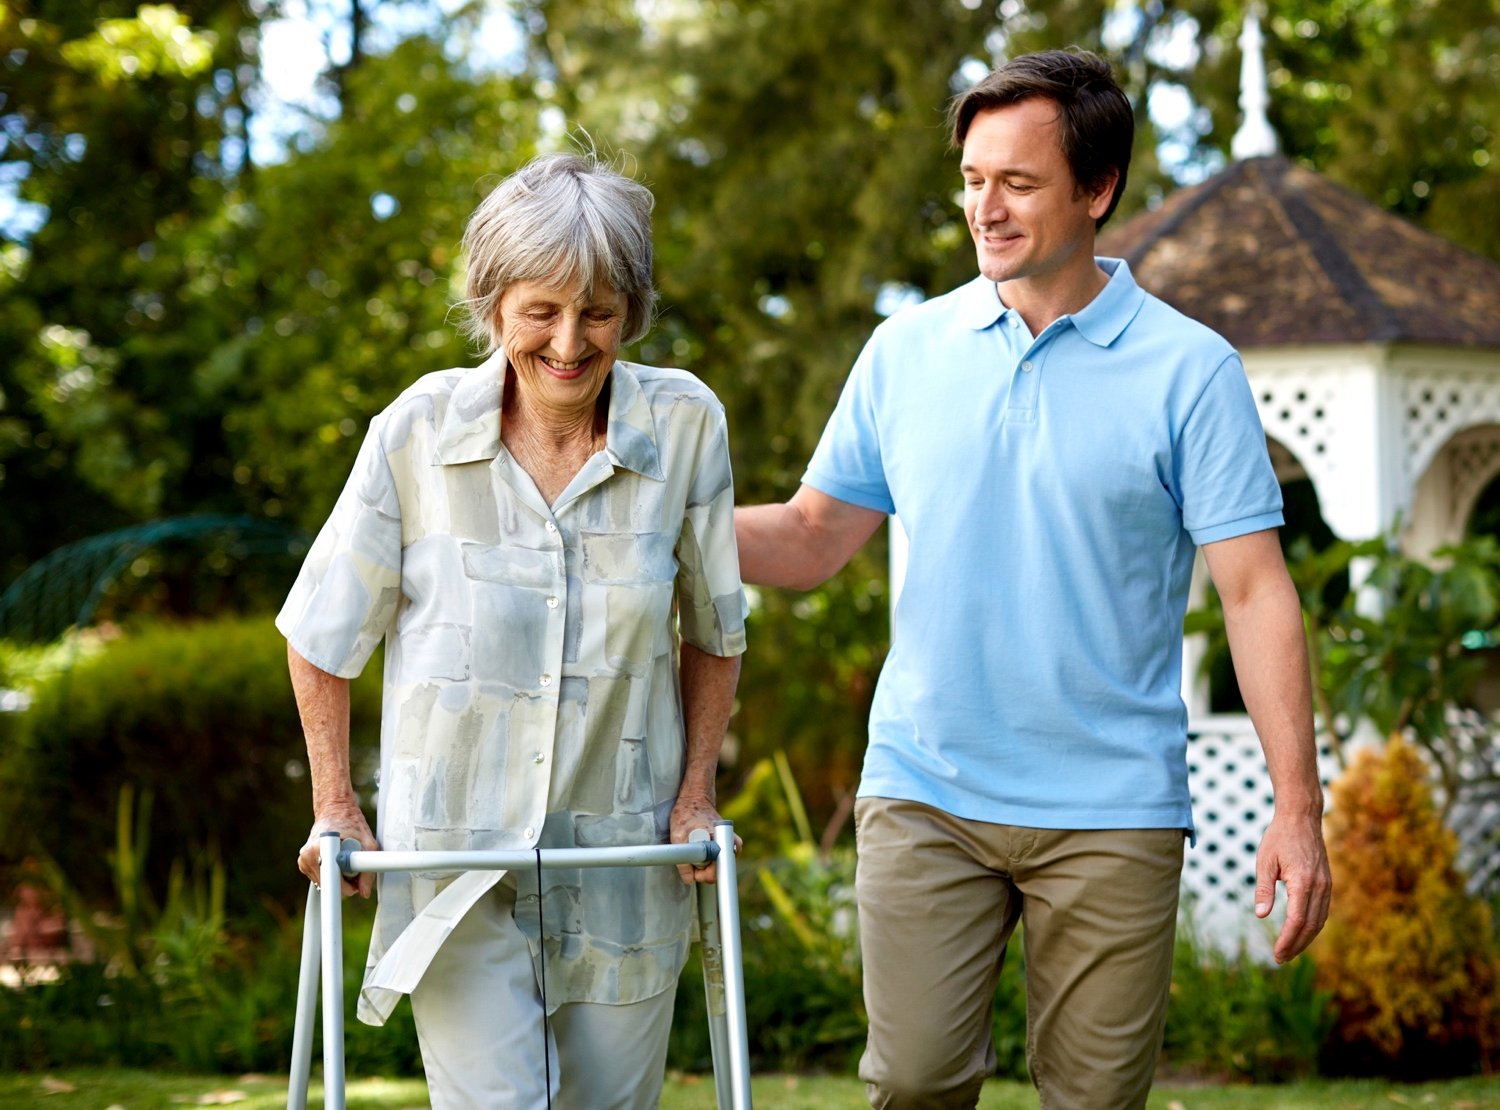 A male staff member helping a senior woman with a walker in the garden